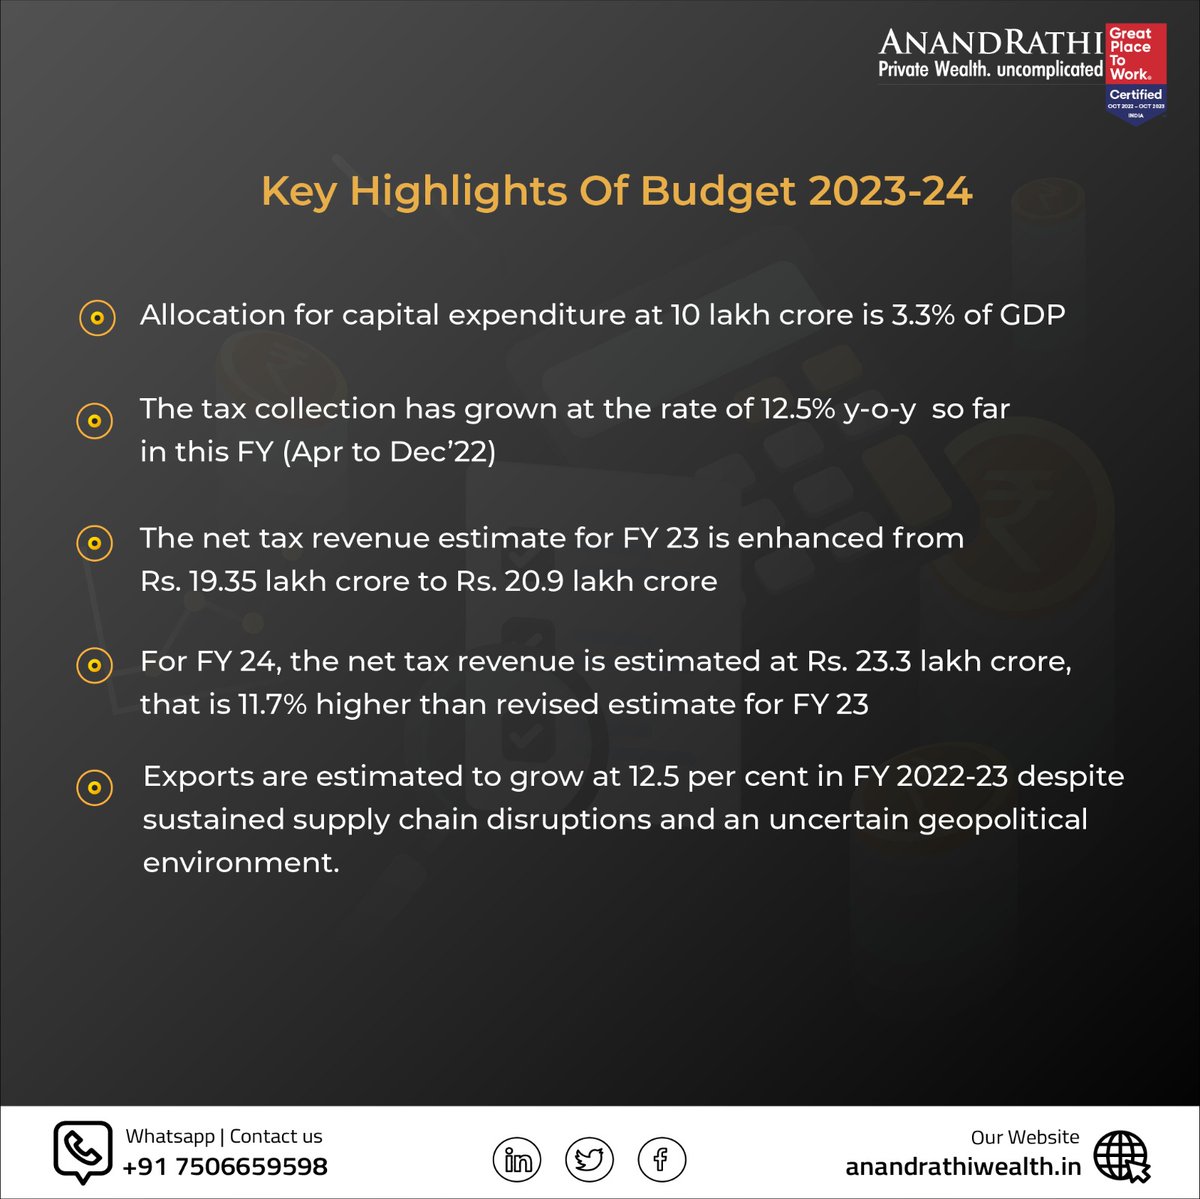 #UnionBudget2023

𝐊𝐞𝐲 𝐇𝐢𝐠𝐡𝐥𝐢𝐠𝐡𝐭𝐬 𝐎𝐟 𝐔𝐧𝐢𝐨𝐧 𝐁𝐮𝐝𝐠𝐞𝐭 𝟐𝟎𝟐𝟑-𝟐𝟒.

Know more: anandrathiwealth.in/landing
#budgetsession #Budget2023 #anandrathiwealth #mathematicalrevolution #uncomplicated #makeithappen #financialplanning #personaltax #tax #incometax